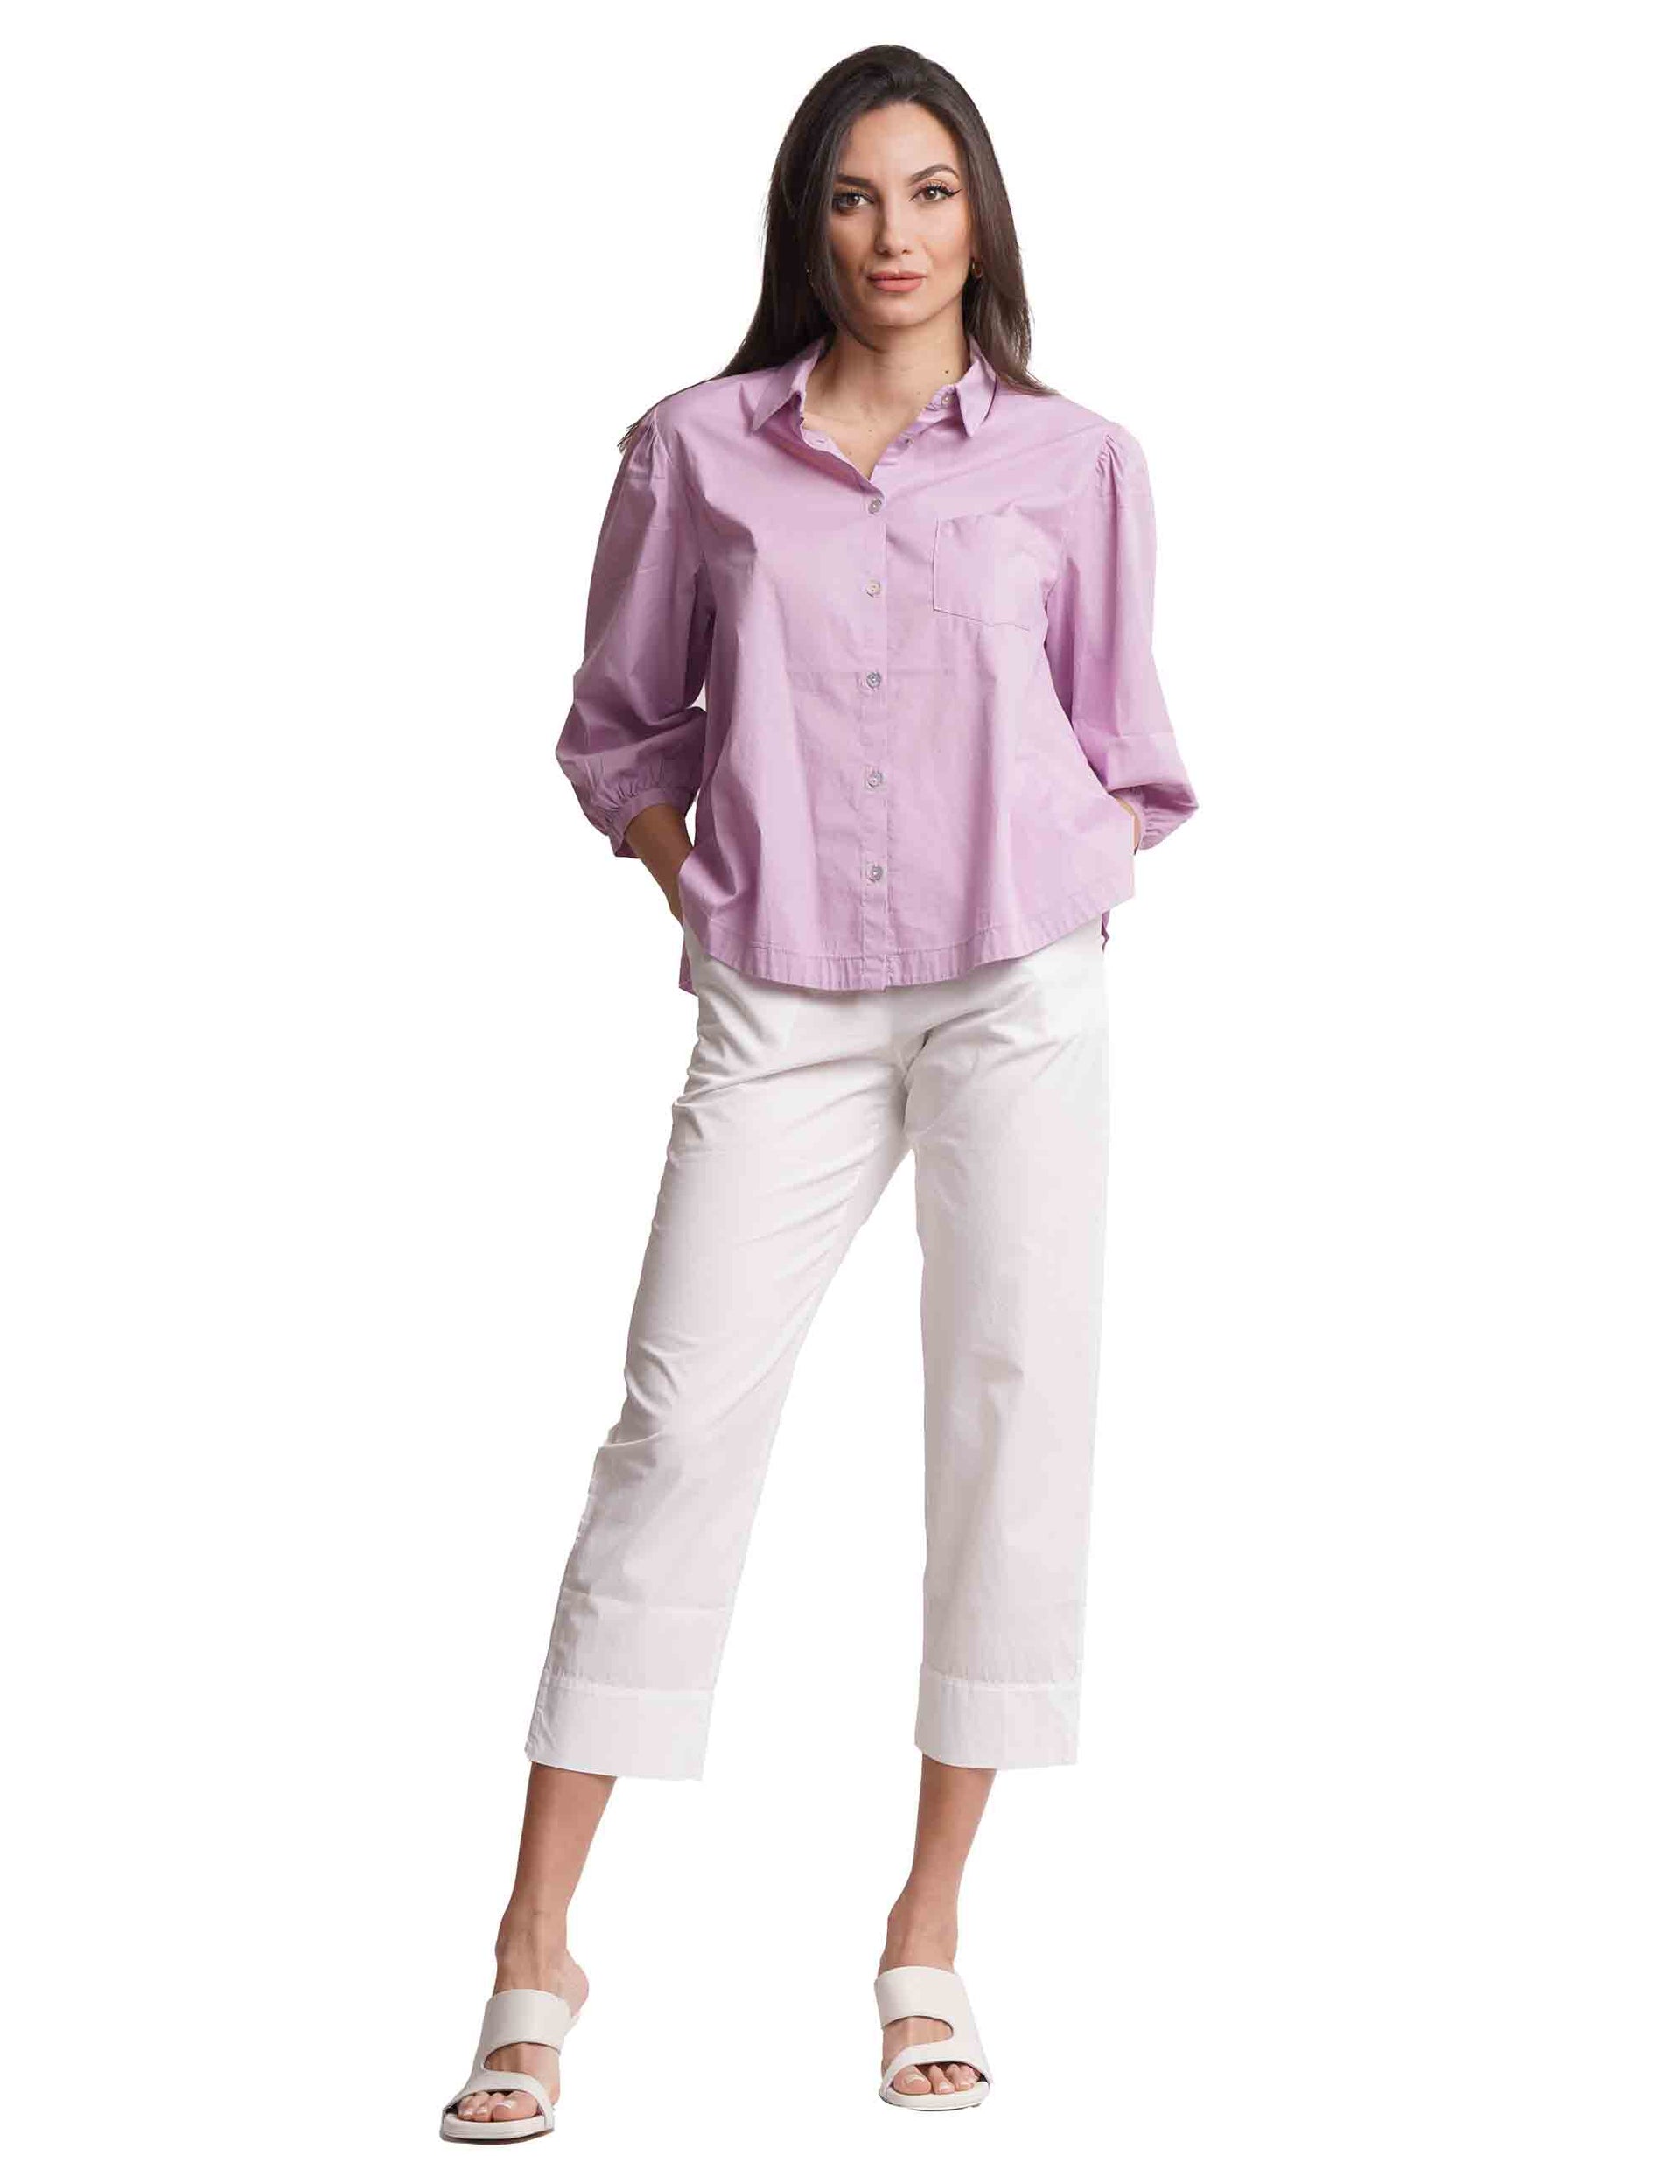 Women's lilac cotton shirts with puff sleeves